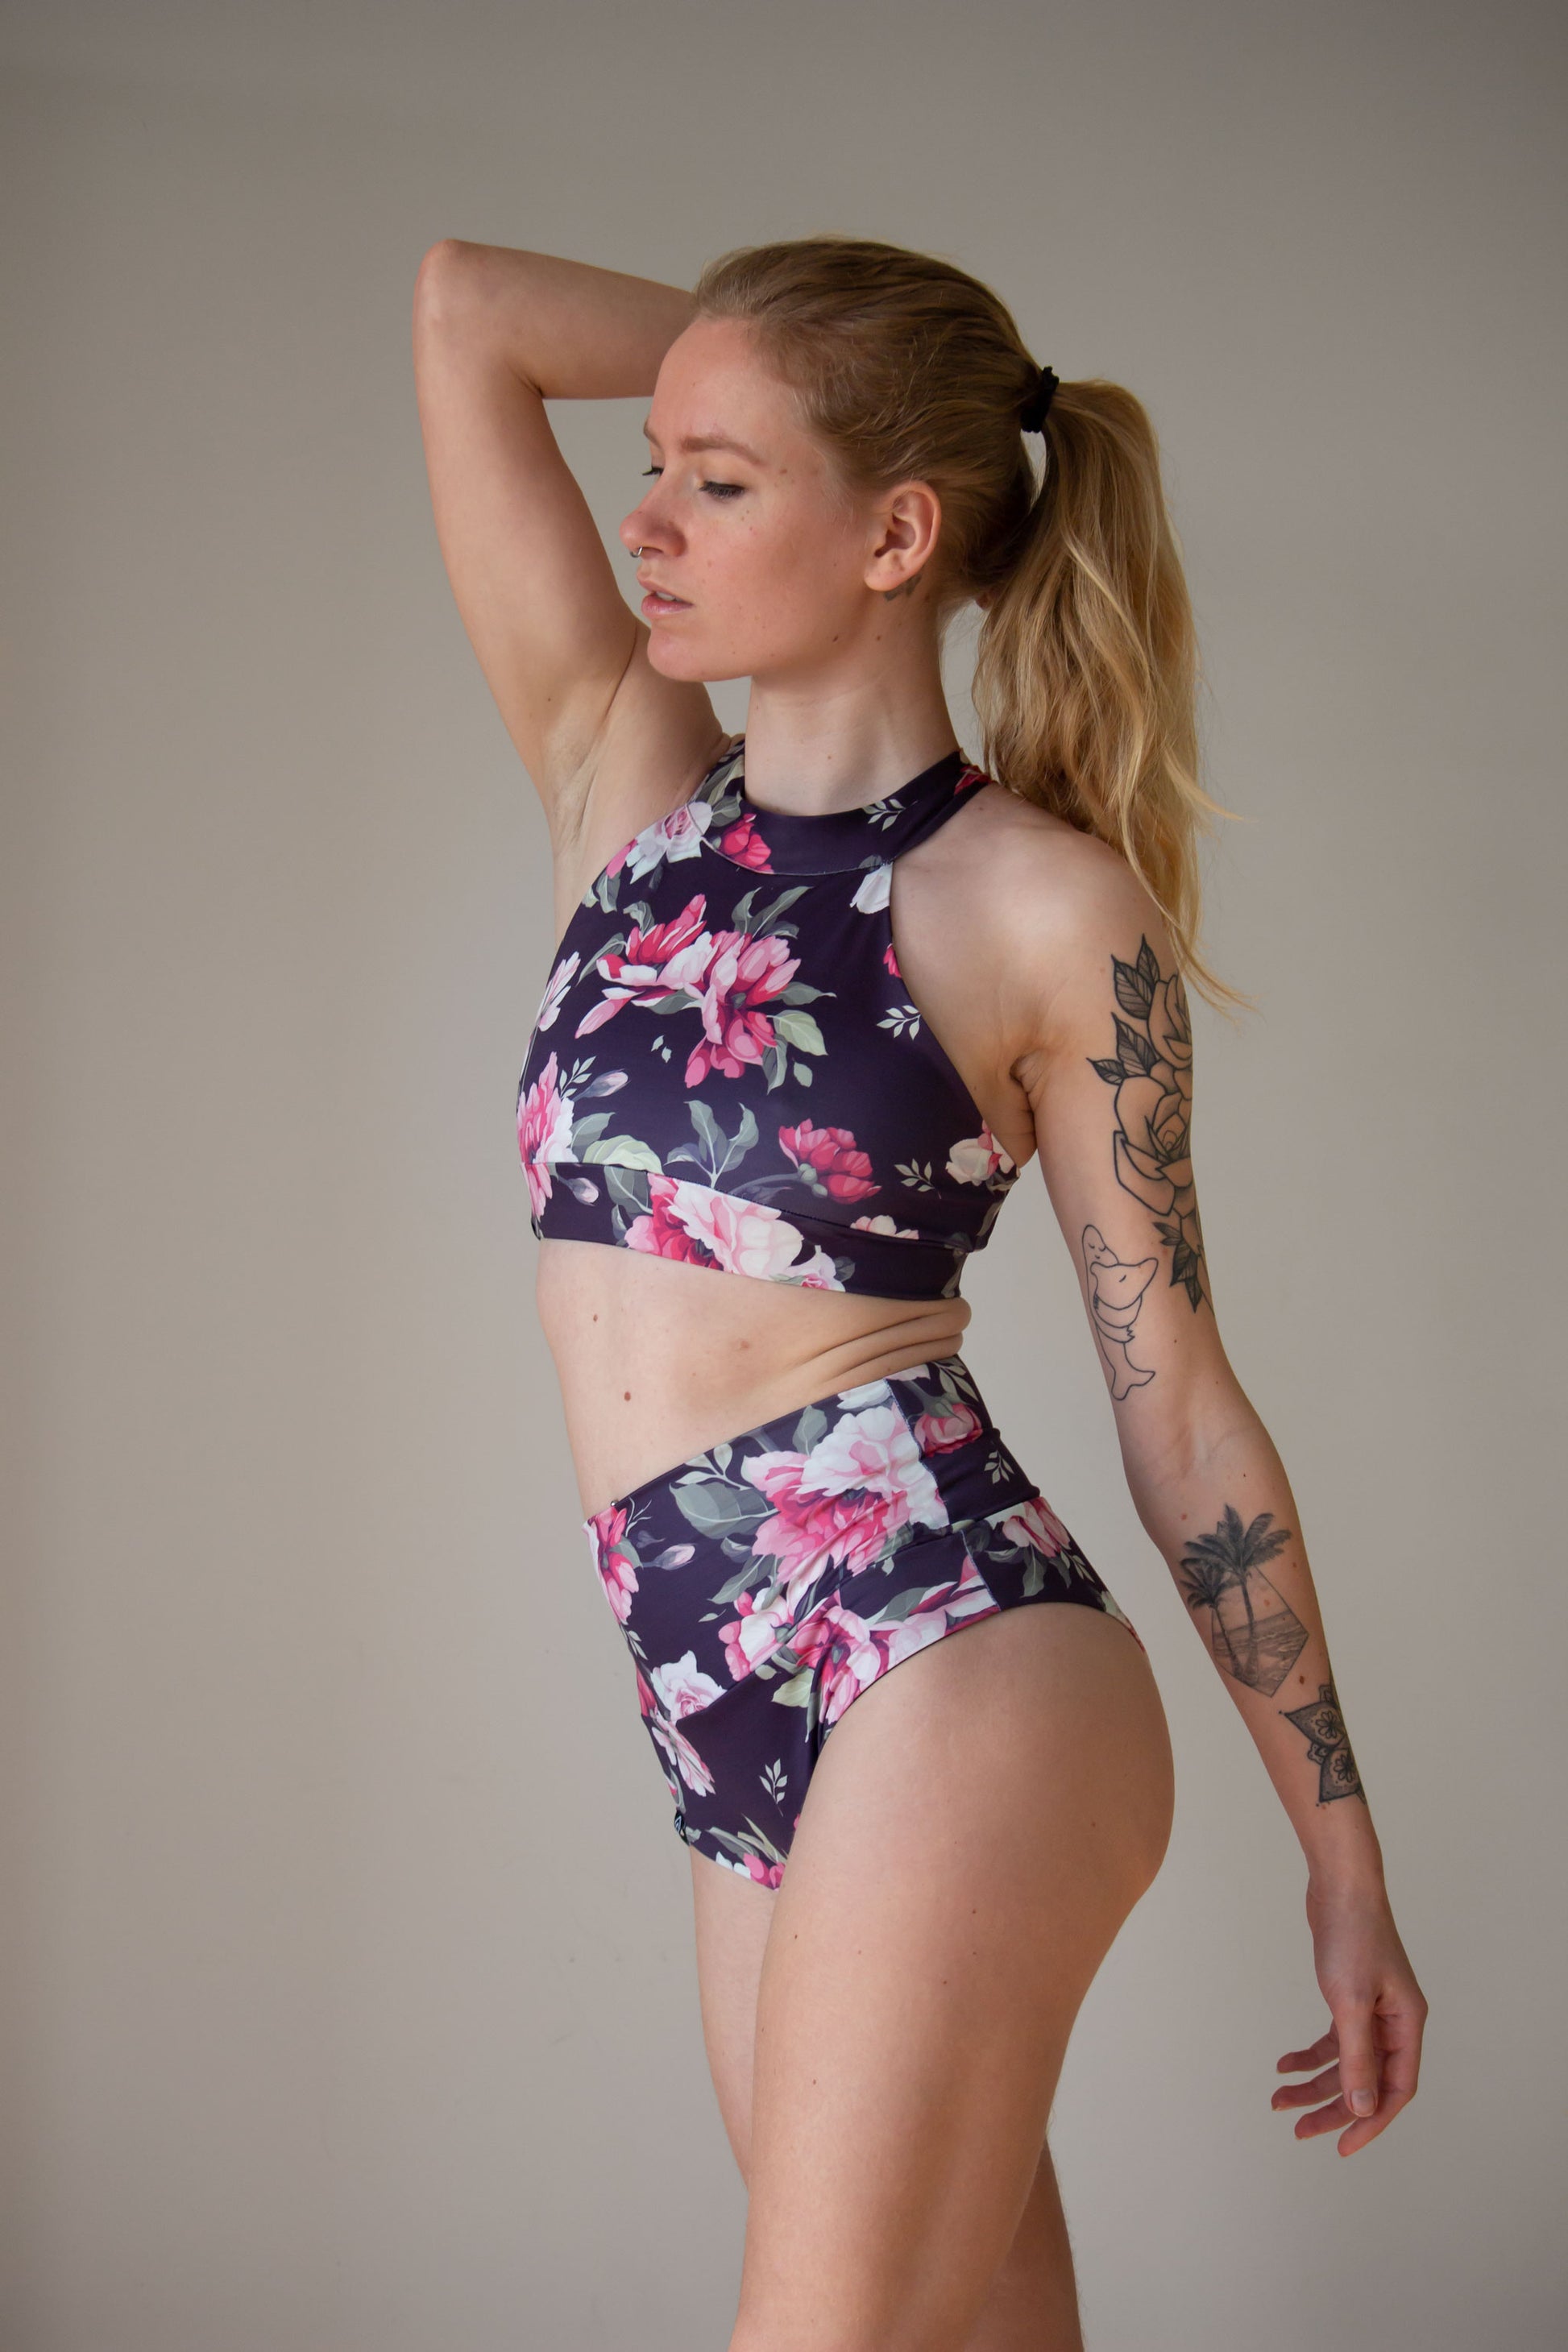 Halter sports bra for pole dance in floral print with cross back